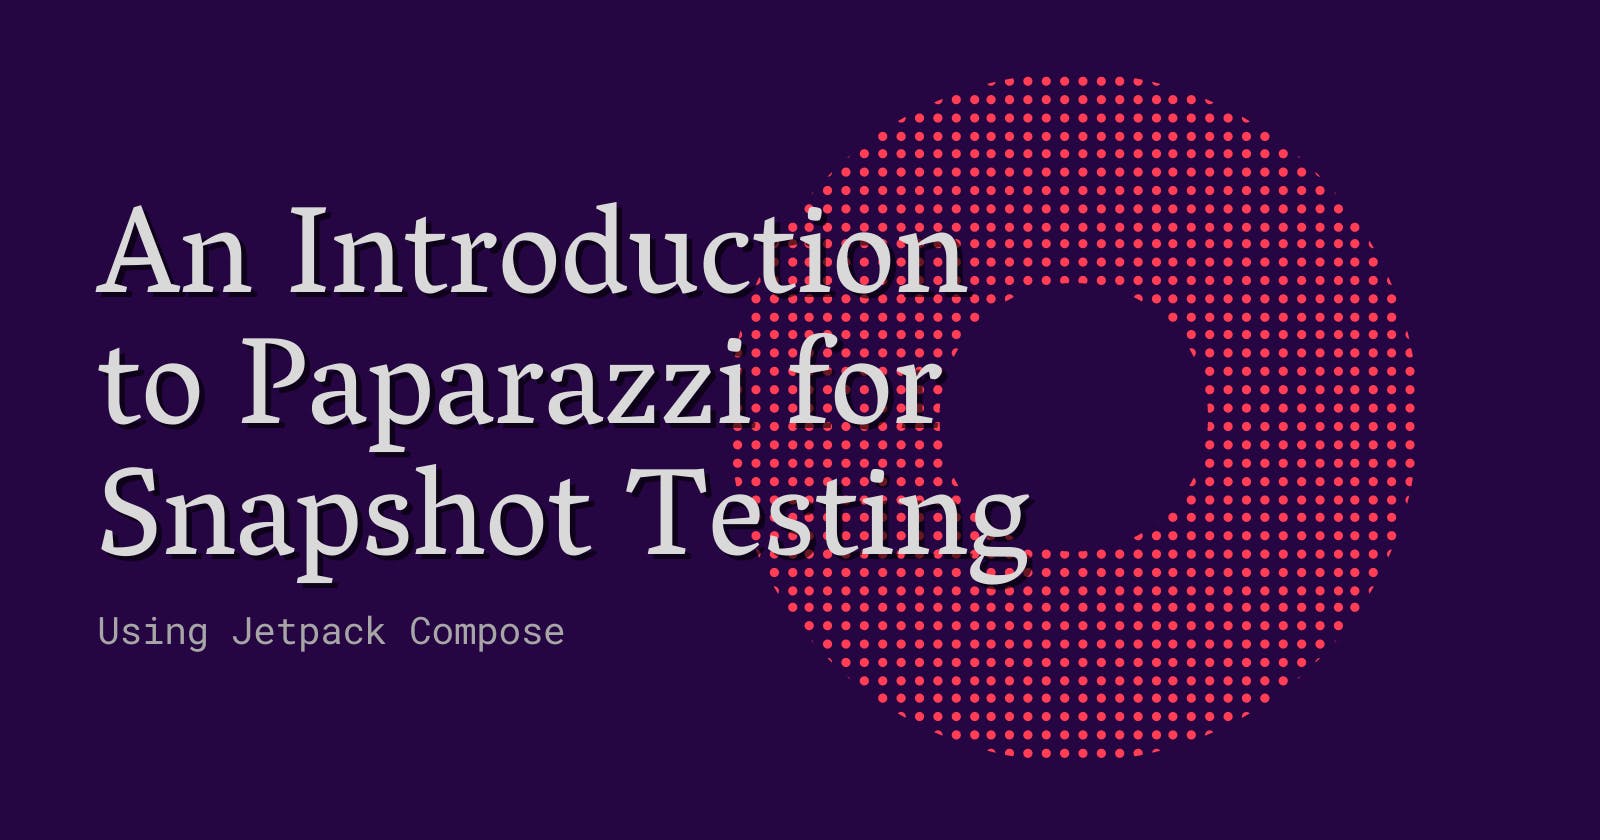 An Introduction to Paparazzi for Snapshot Testing